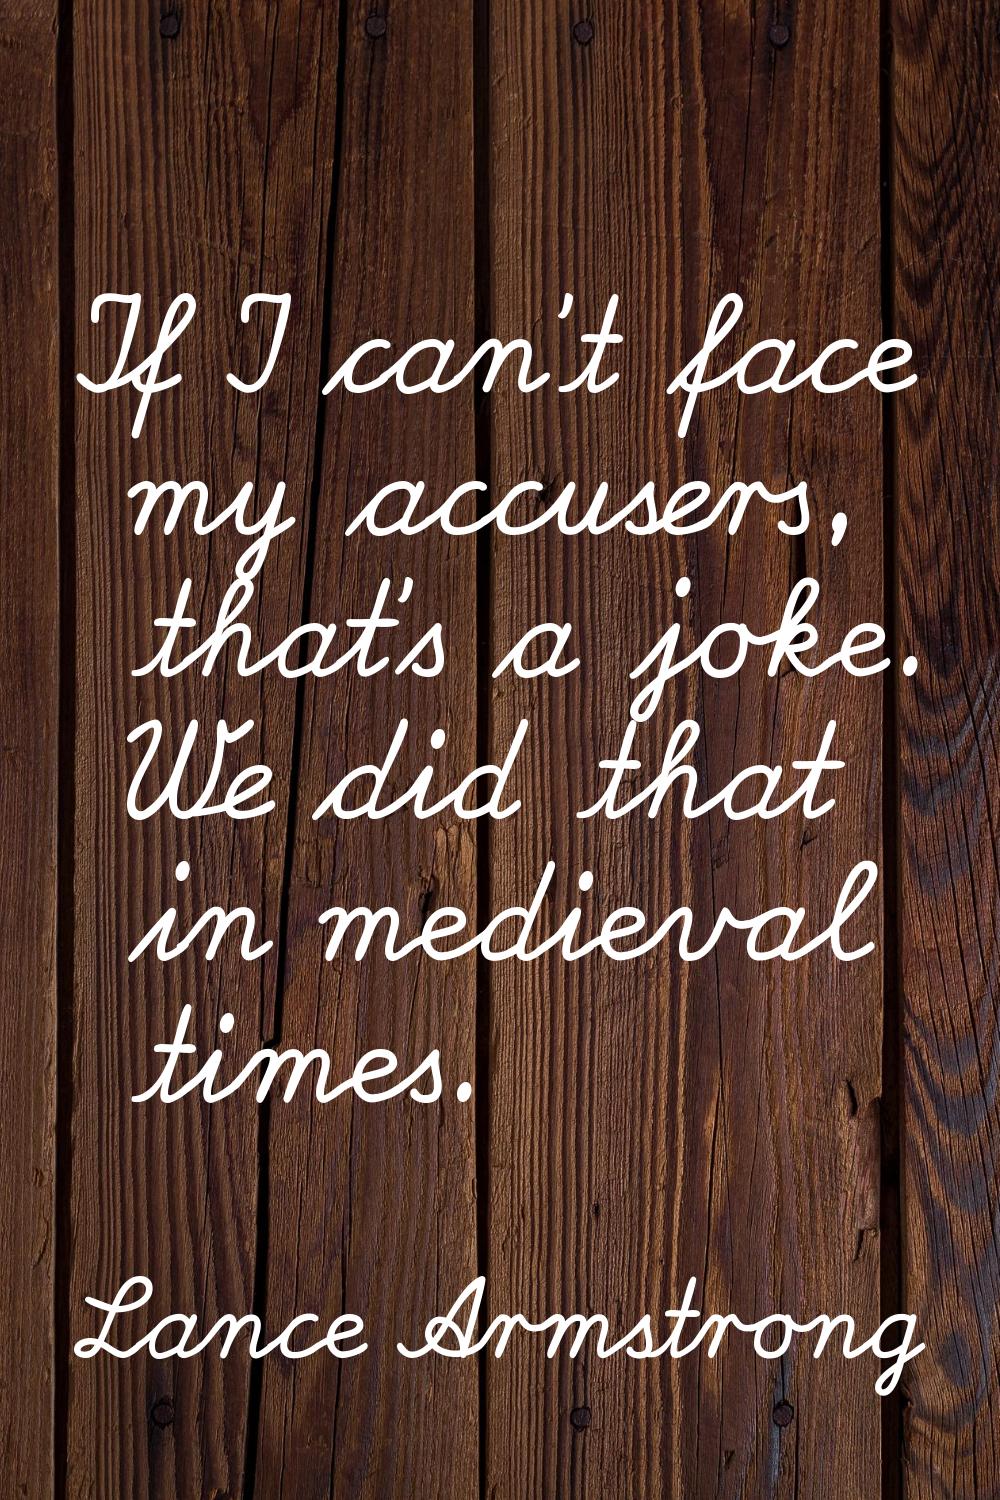 If I can't face my accusers, that's a joke. We did that in medieval times.